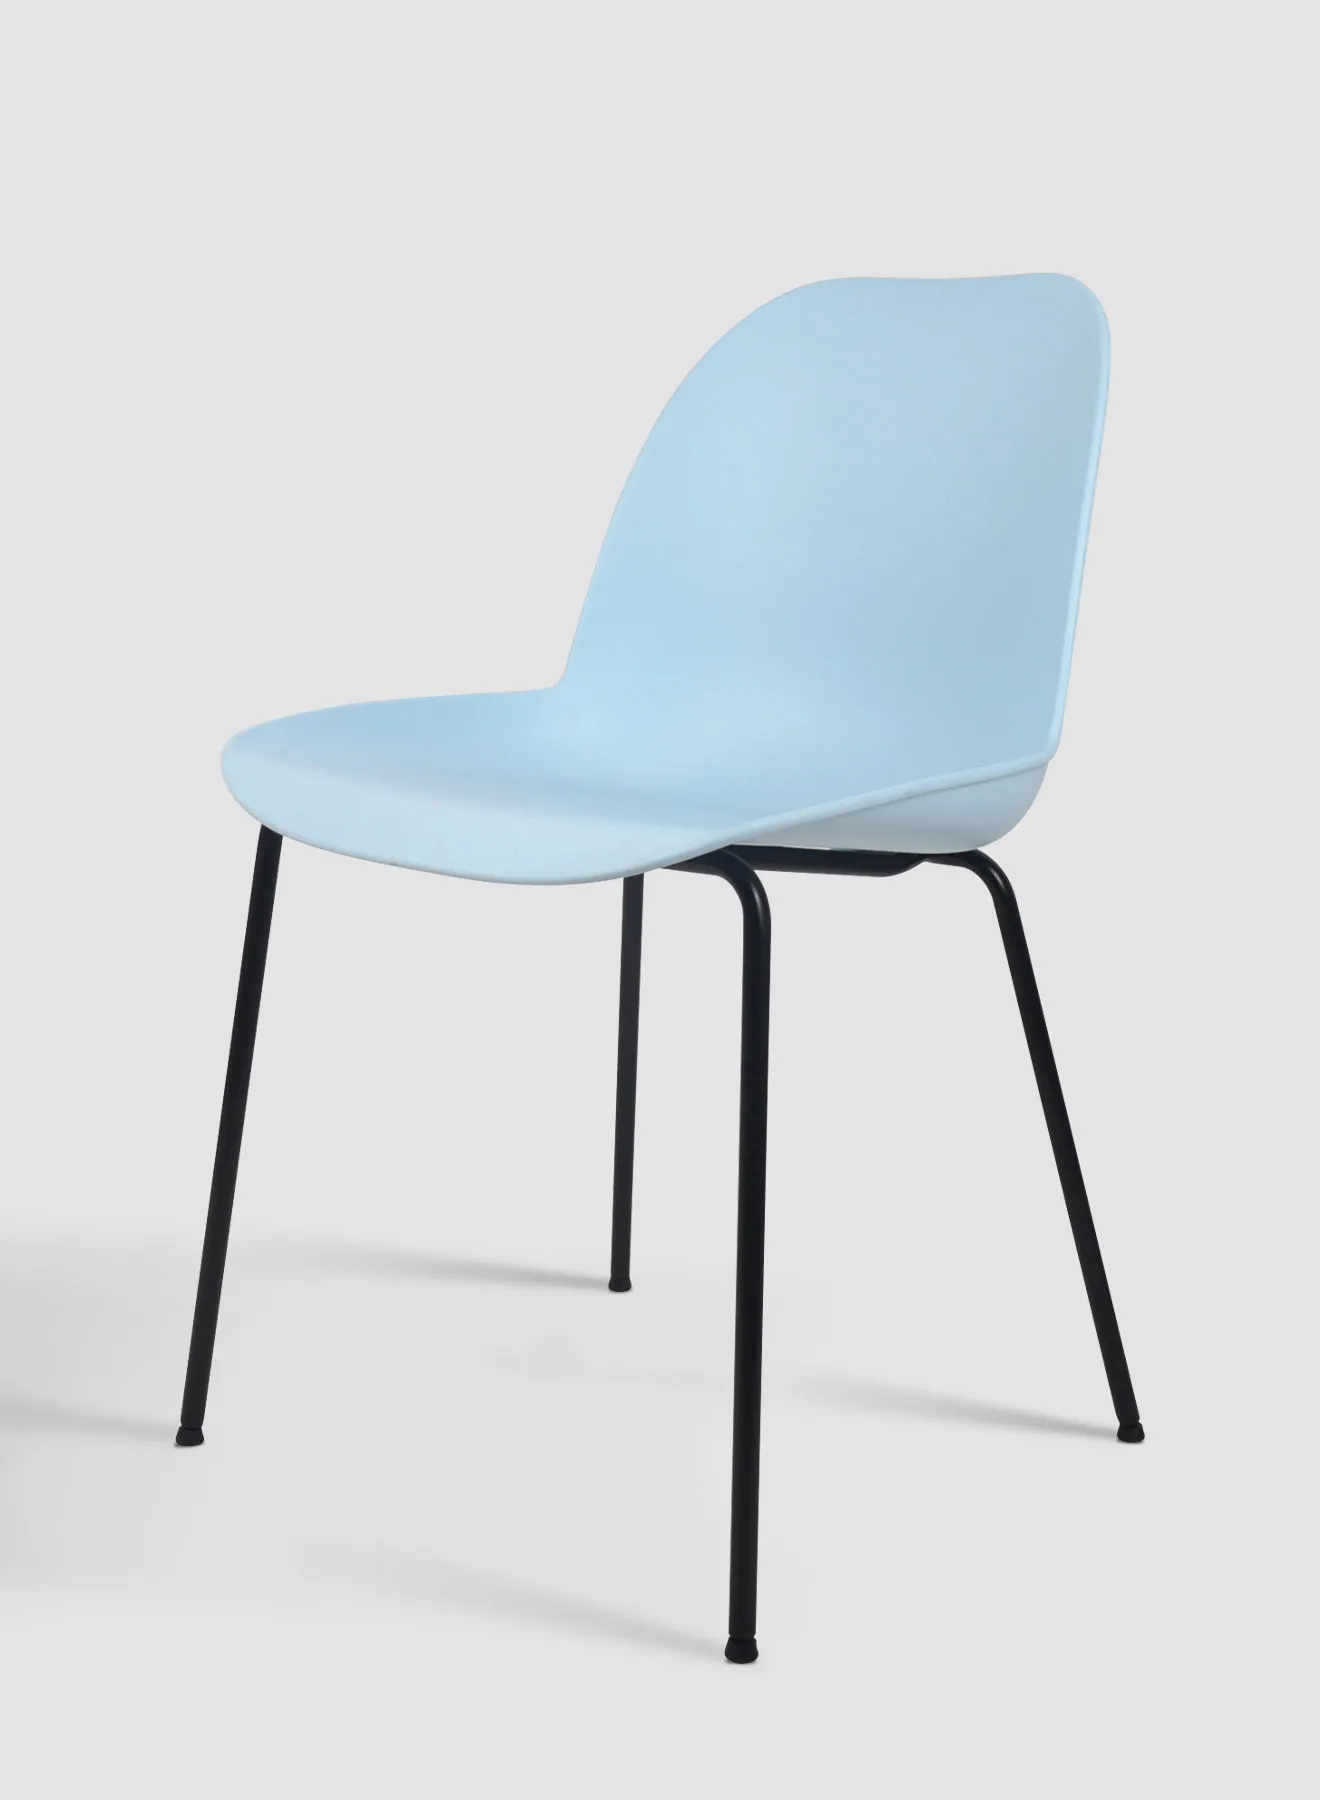 Switch Dining Chair In Pale Blue Plastic Chair Size L54.5 X W48.5 X H82